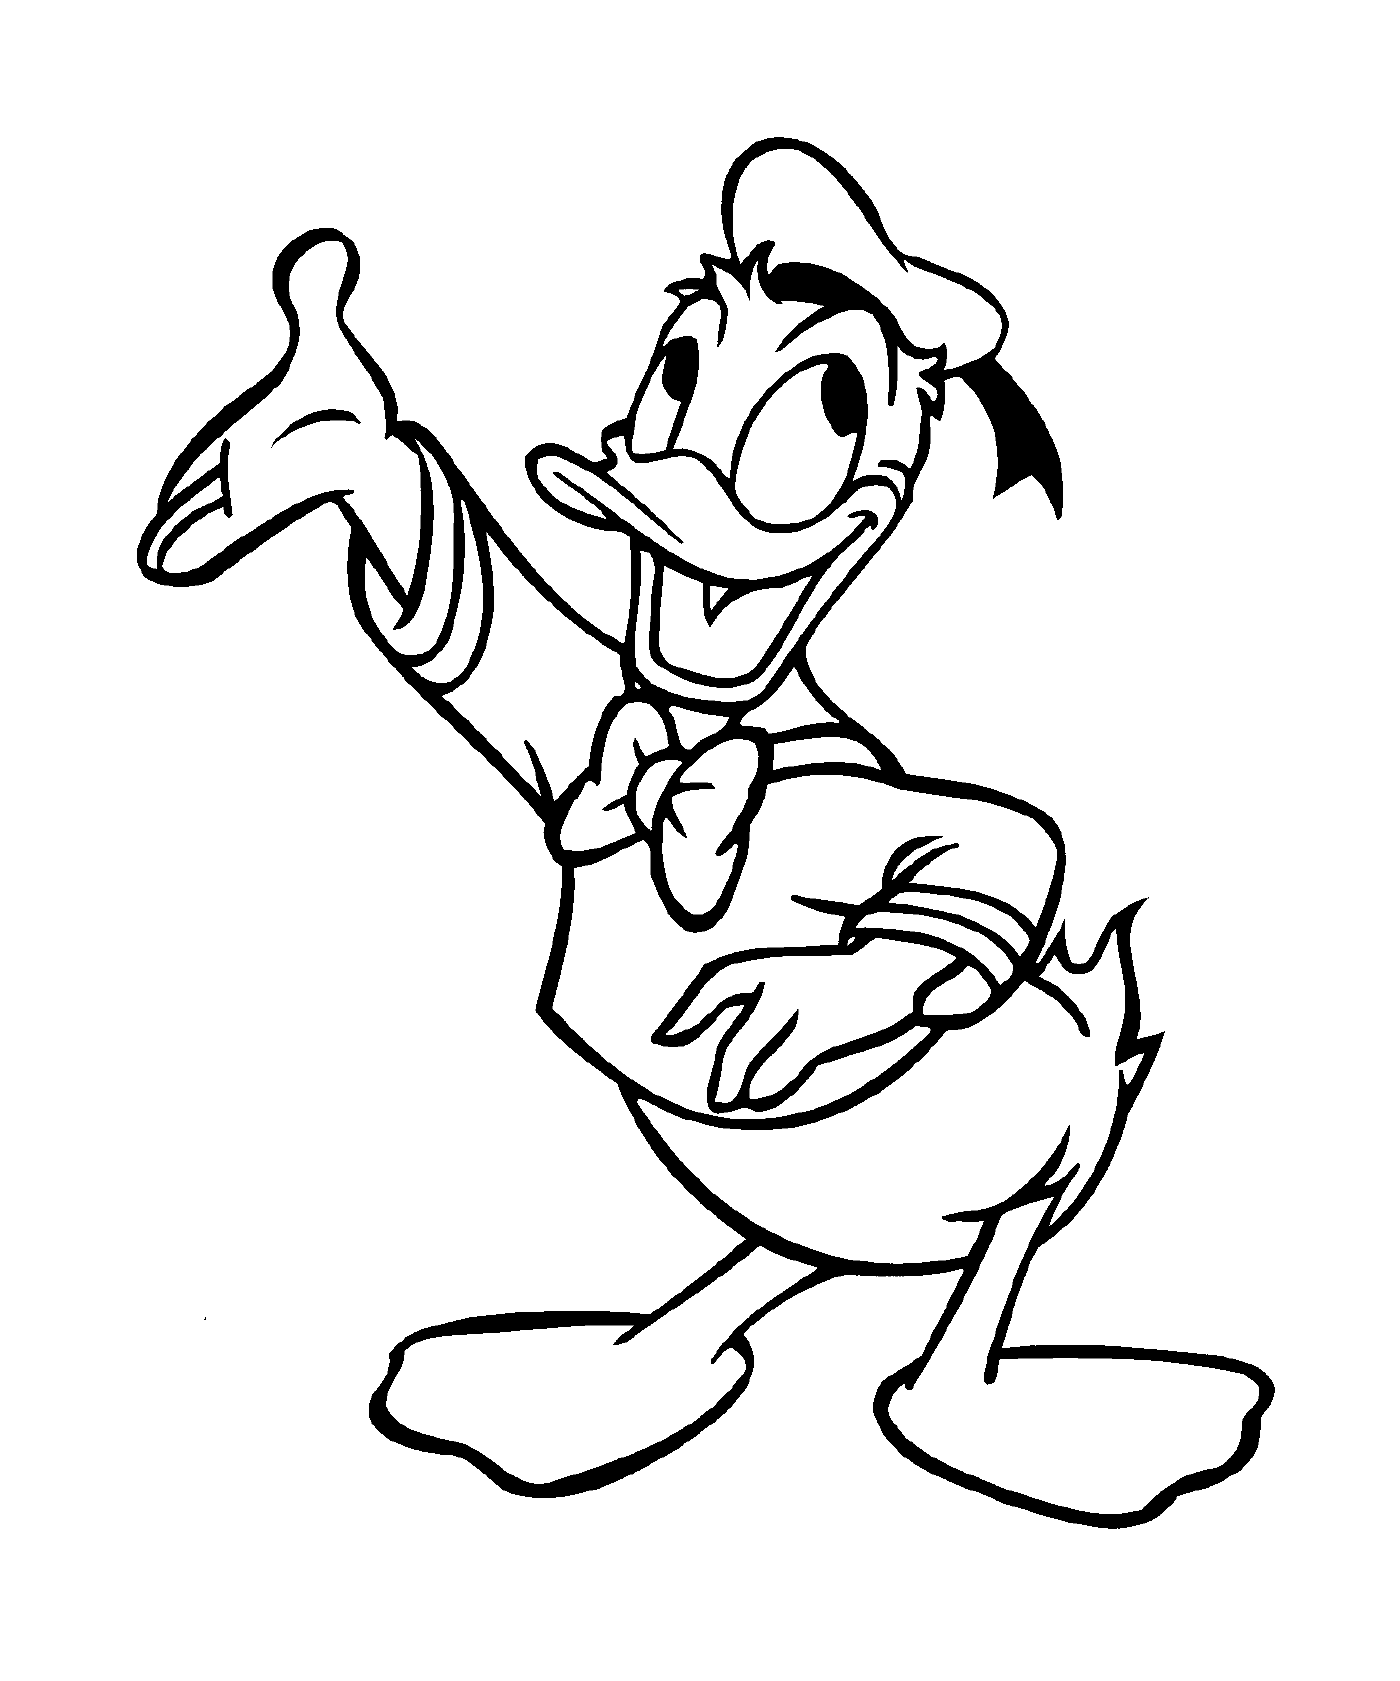  Donald Duck by Dick Lundy 